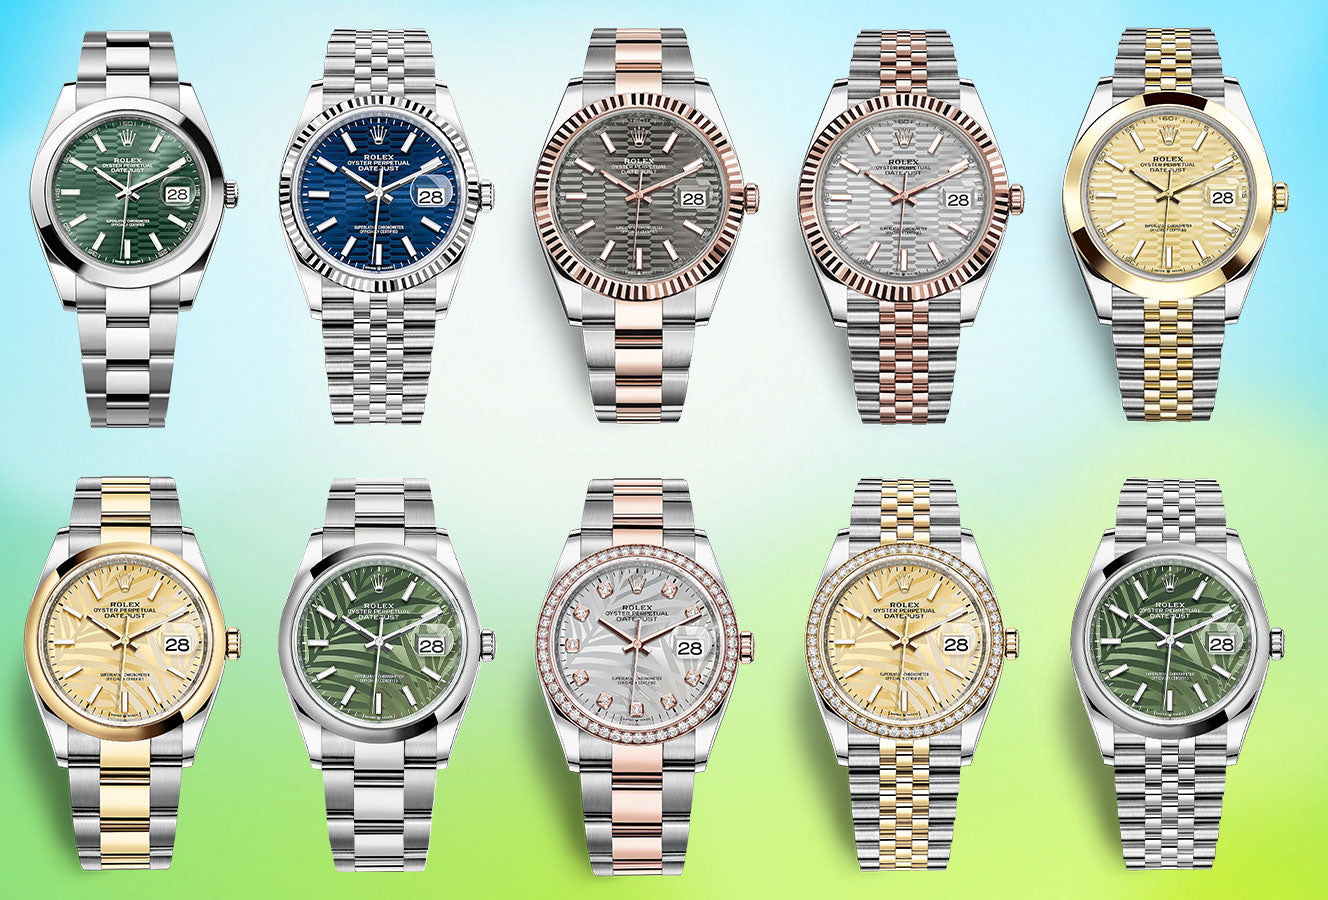 The Rolex Watches Discontinued in 2024 - Datejust with Palm and Fluted Motif Dials